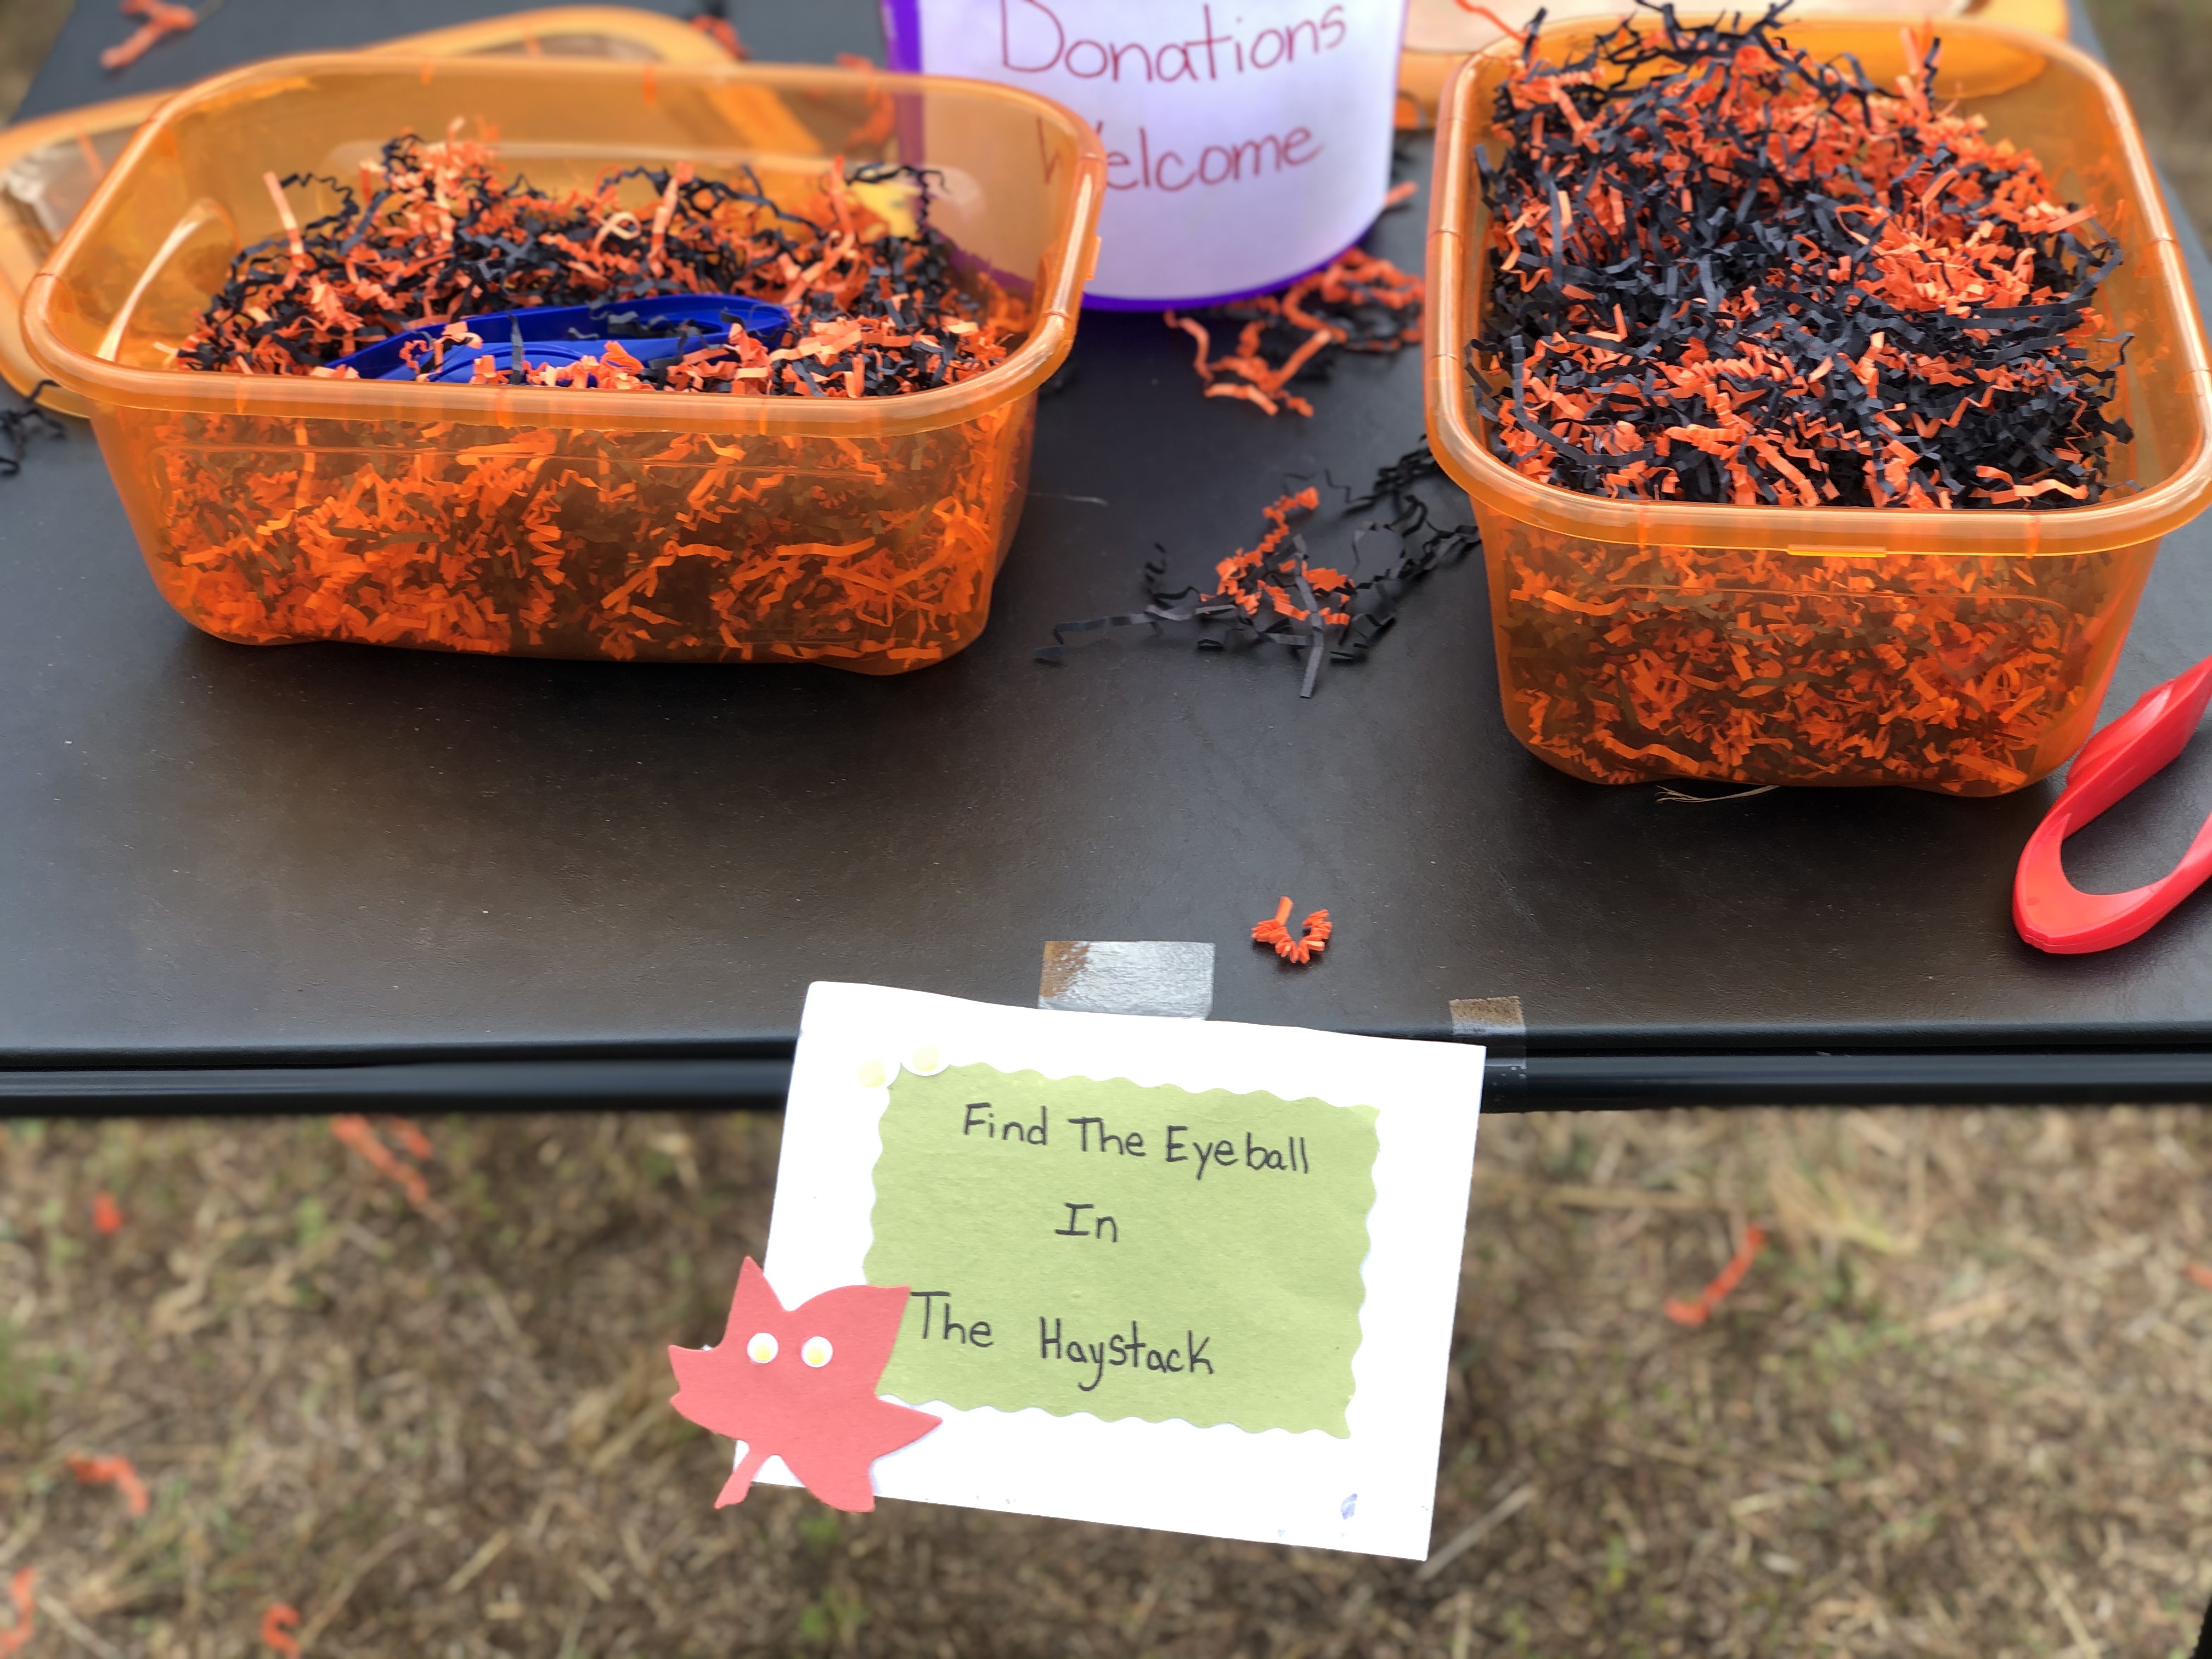 Halloween Games for Kids - Find the Eyeball in the Haystack - Fun Kids Games via Misty Nelson, mom blogger @frostedevents